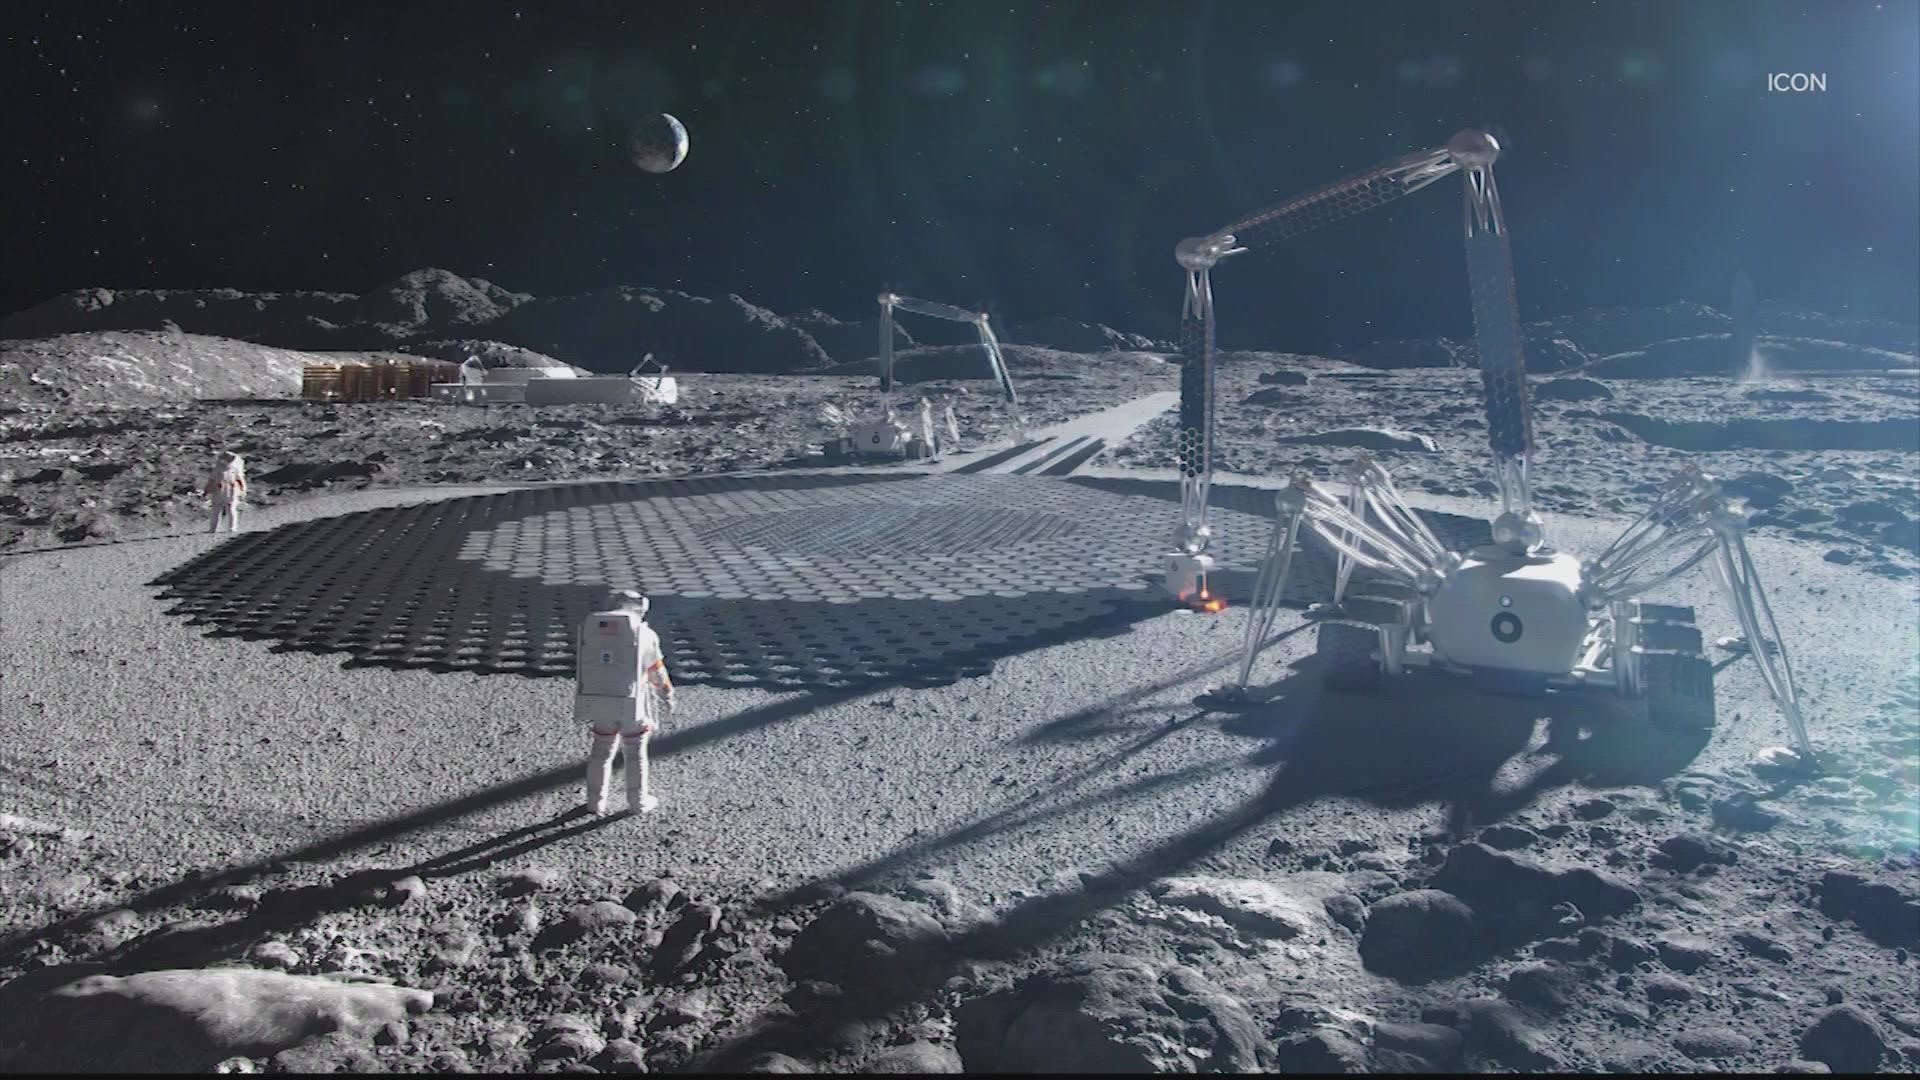 3-D Printed Buildings Coming Soon to a Moon Near You